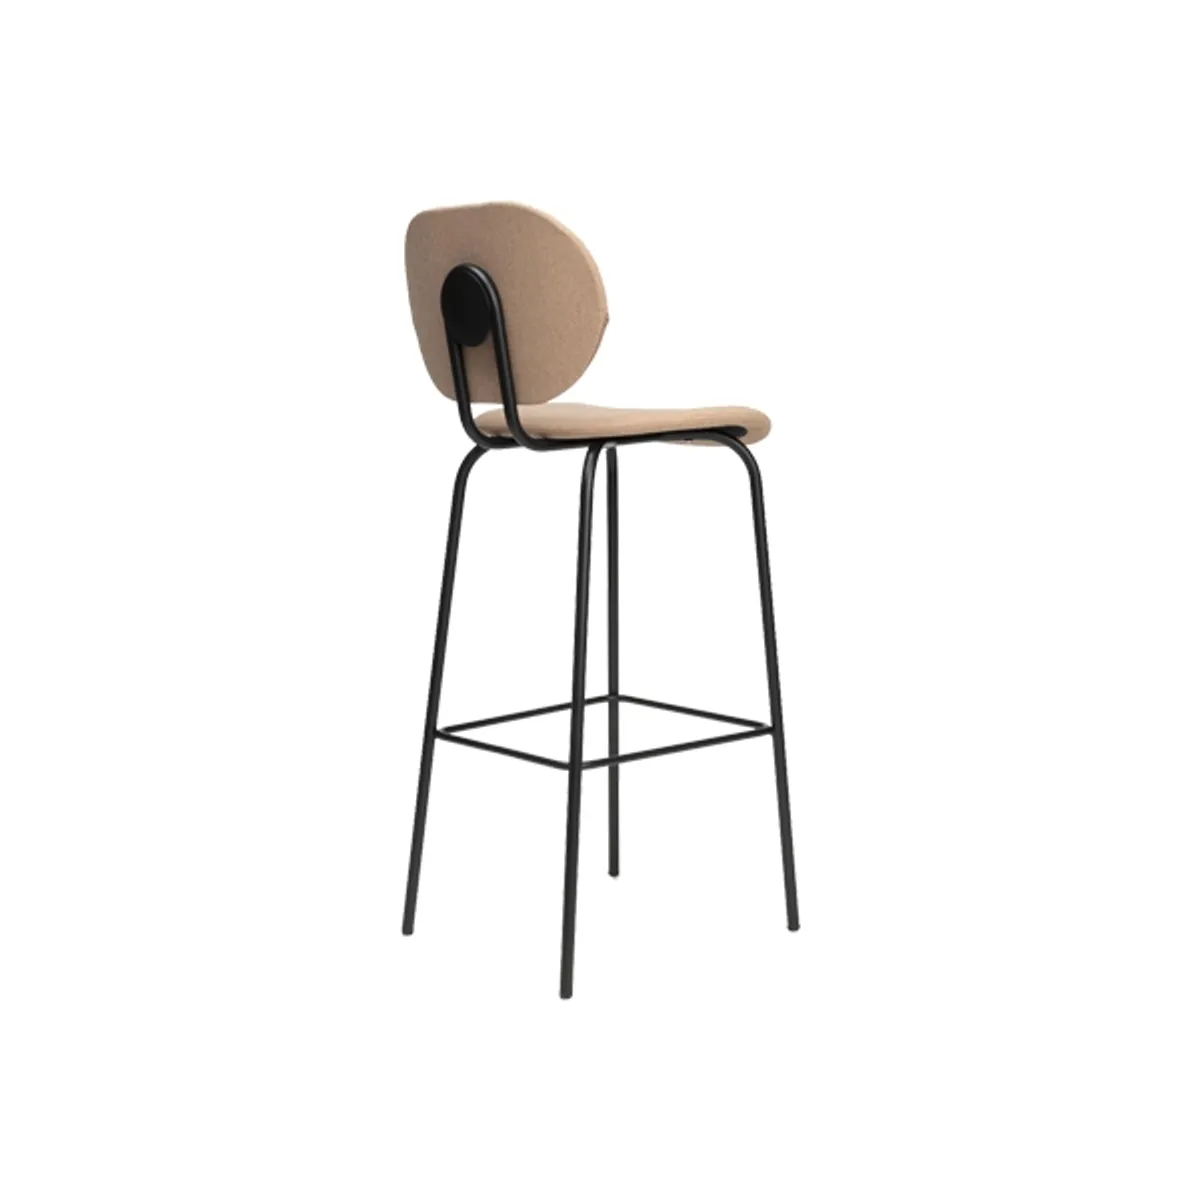 Hattie bar stool Inside Out Contracts6